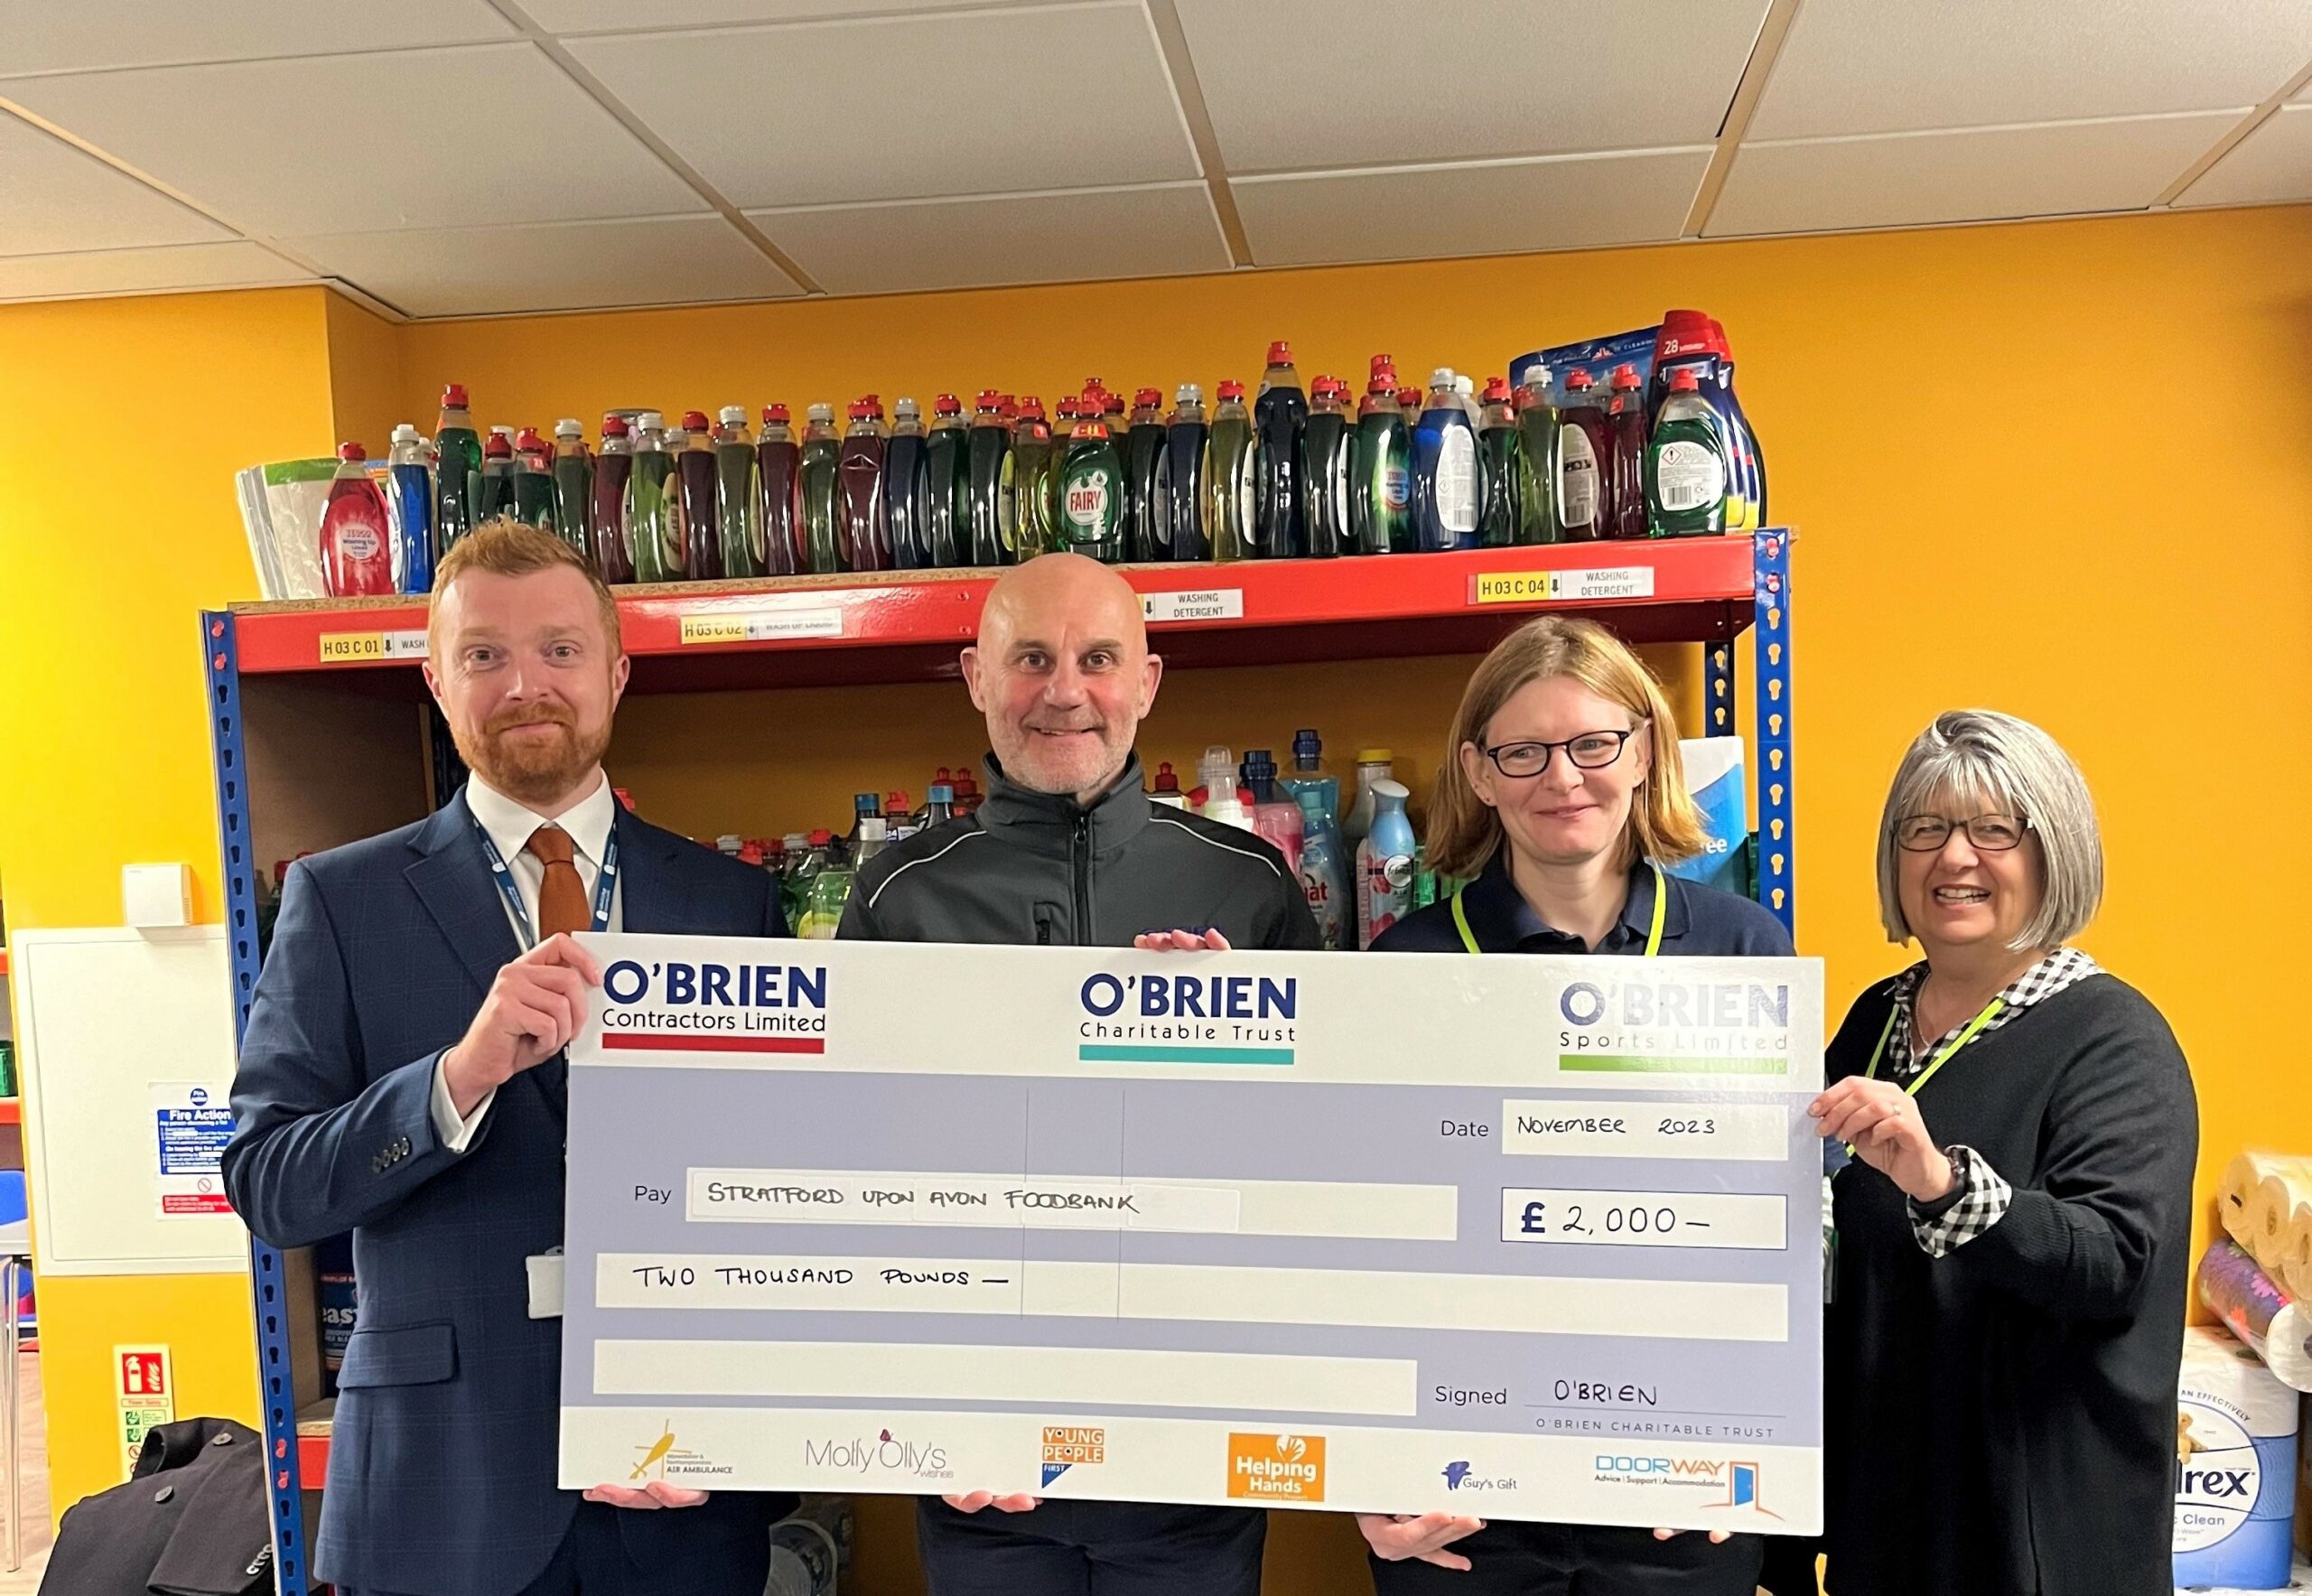 O’Brien Donates £2K to Stratford Upon Avon Foodbank with support from Stratford Upon Avon College